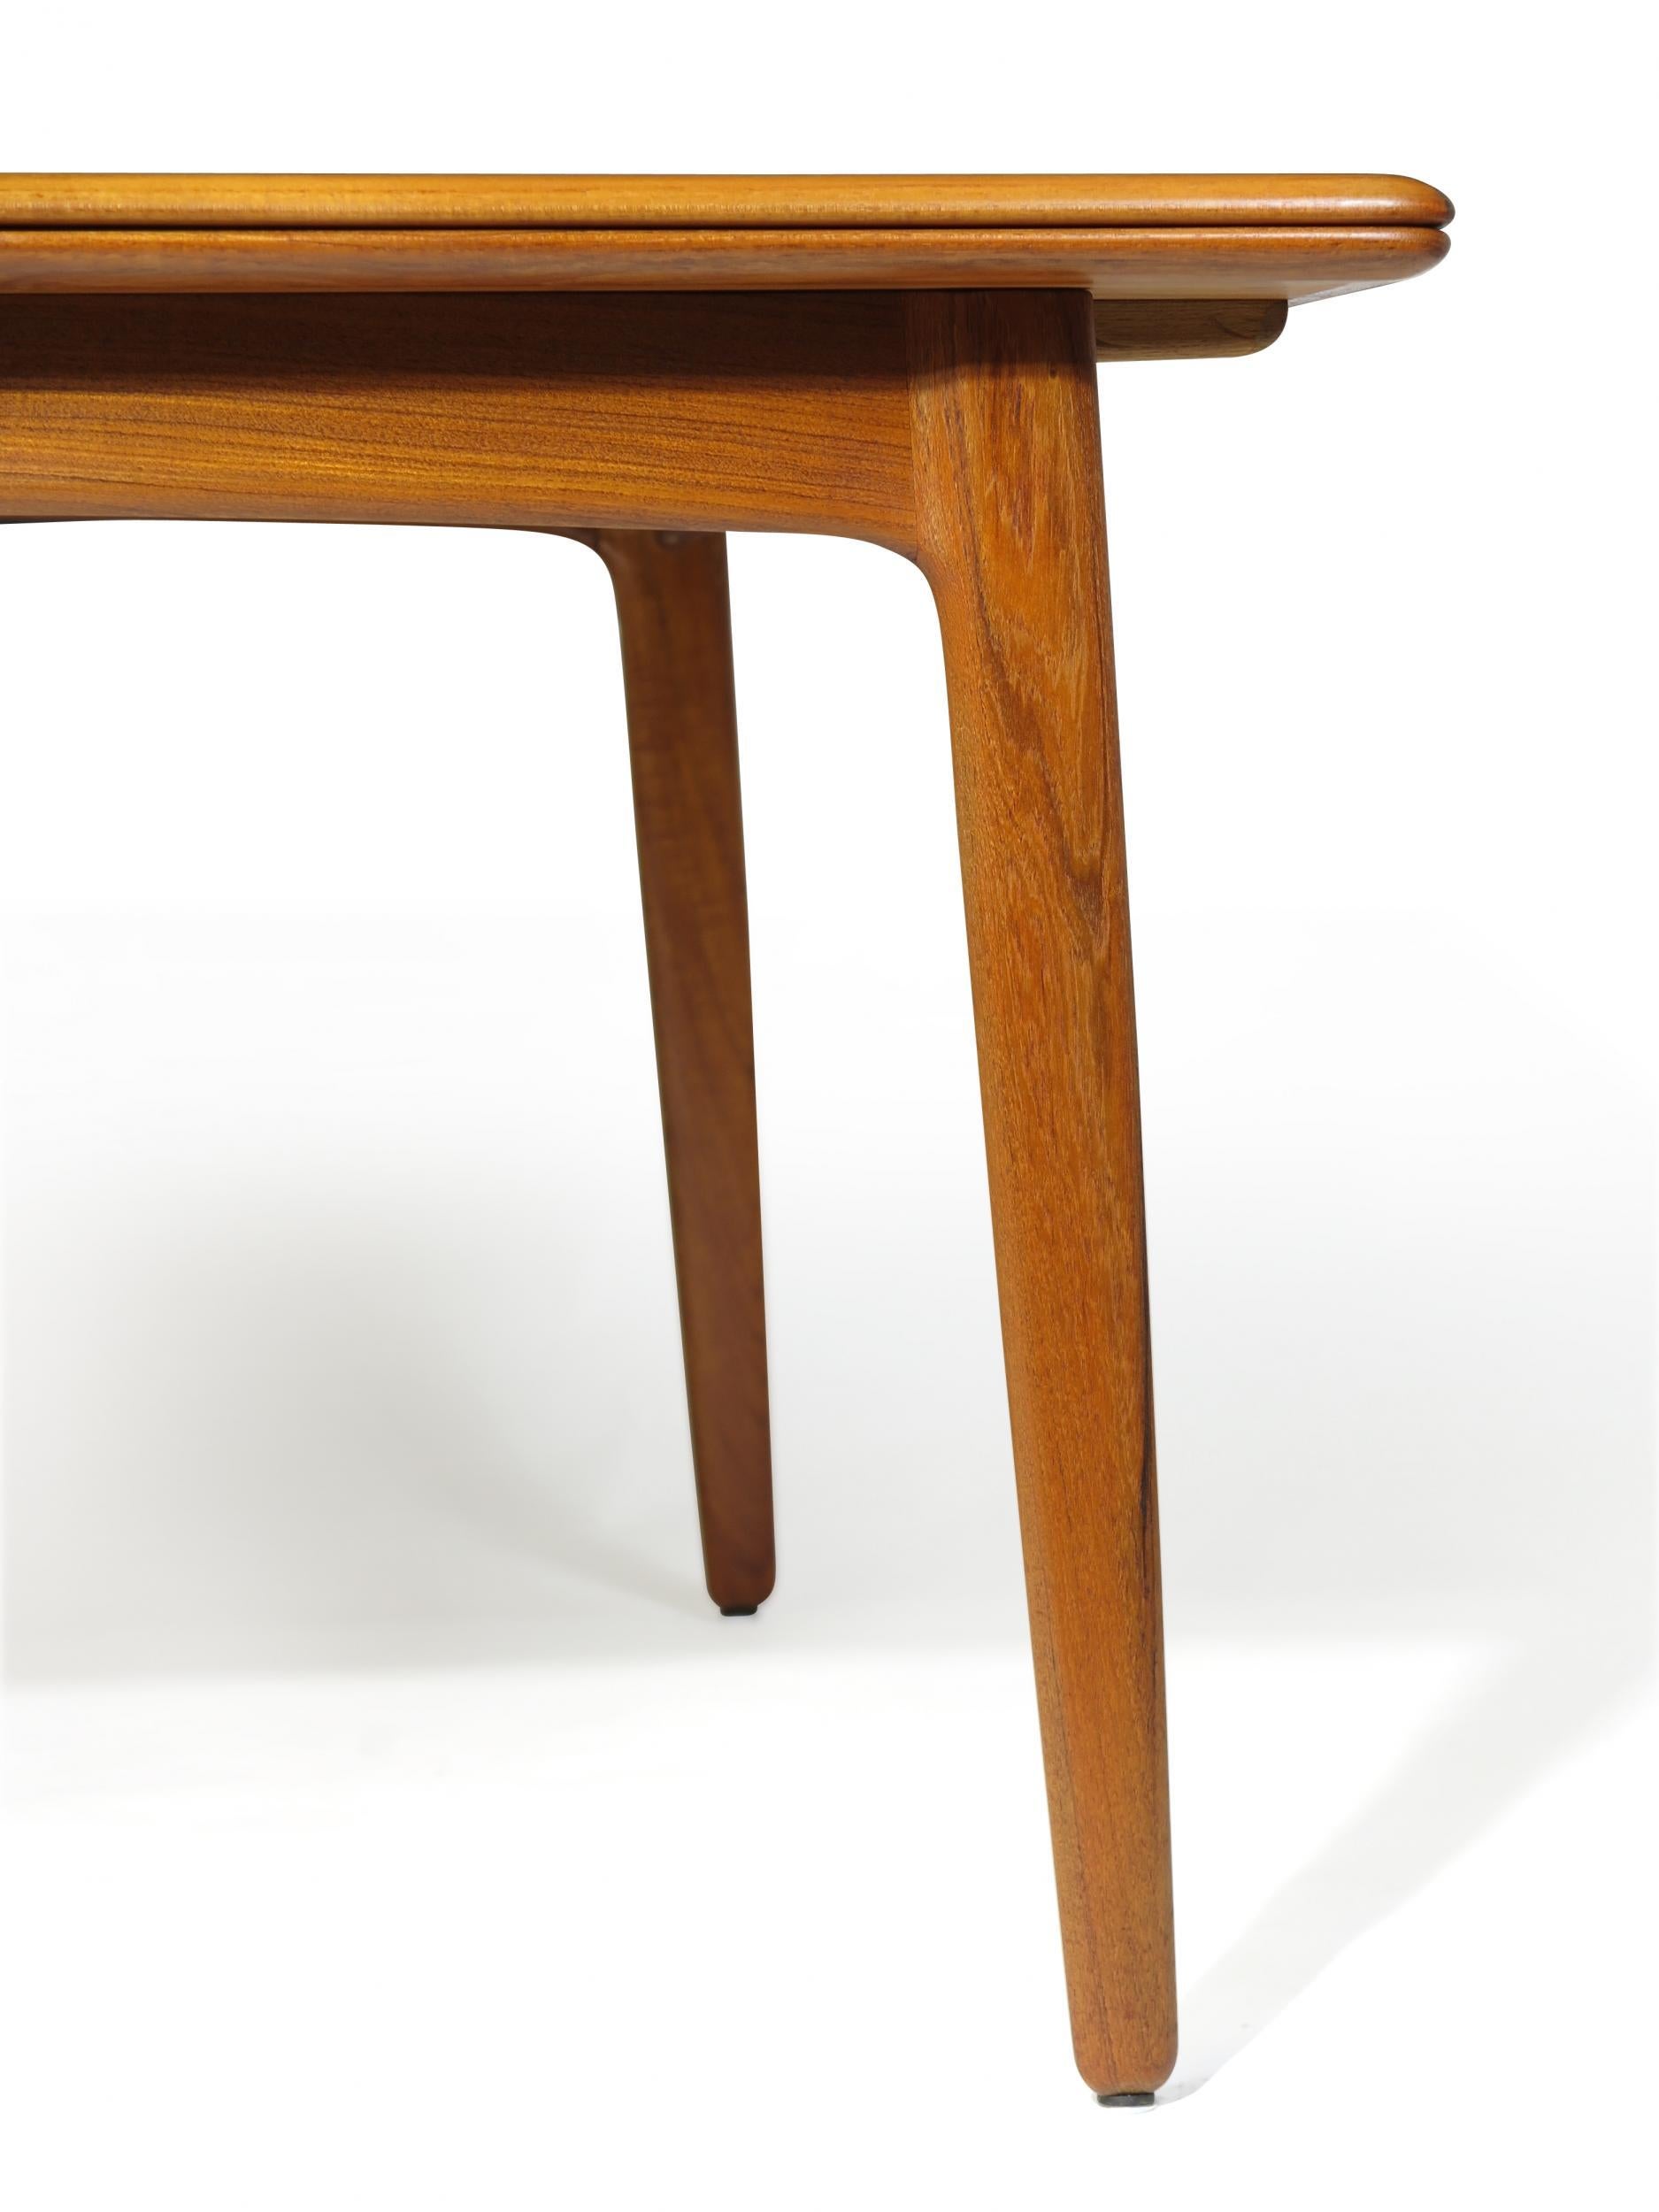 Danish dining table in rich dark teak by HP Hansen, circa 1950s. Beautifully restored, excellent condition and features a draw leaves tucked under the tabletop allow the piece to seat 6-10 guests comfortably.
Fully extended with two leaves opened,